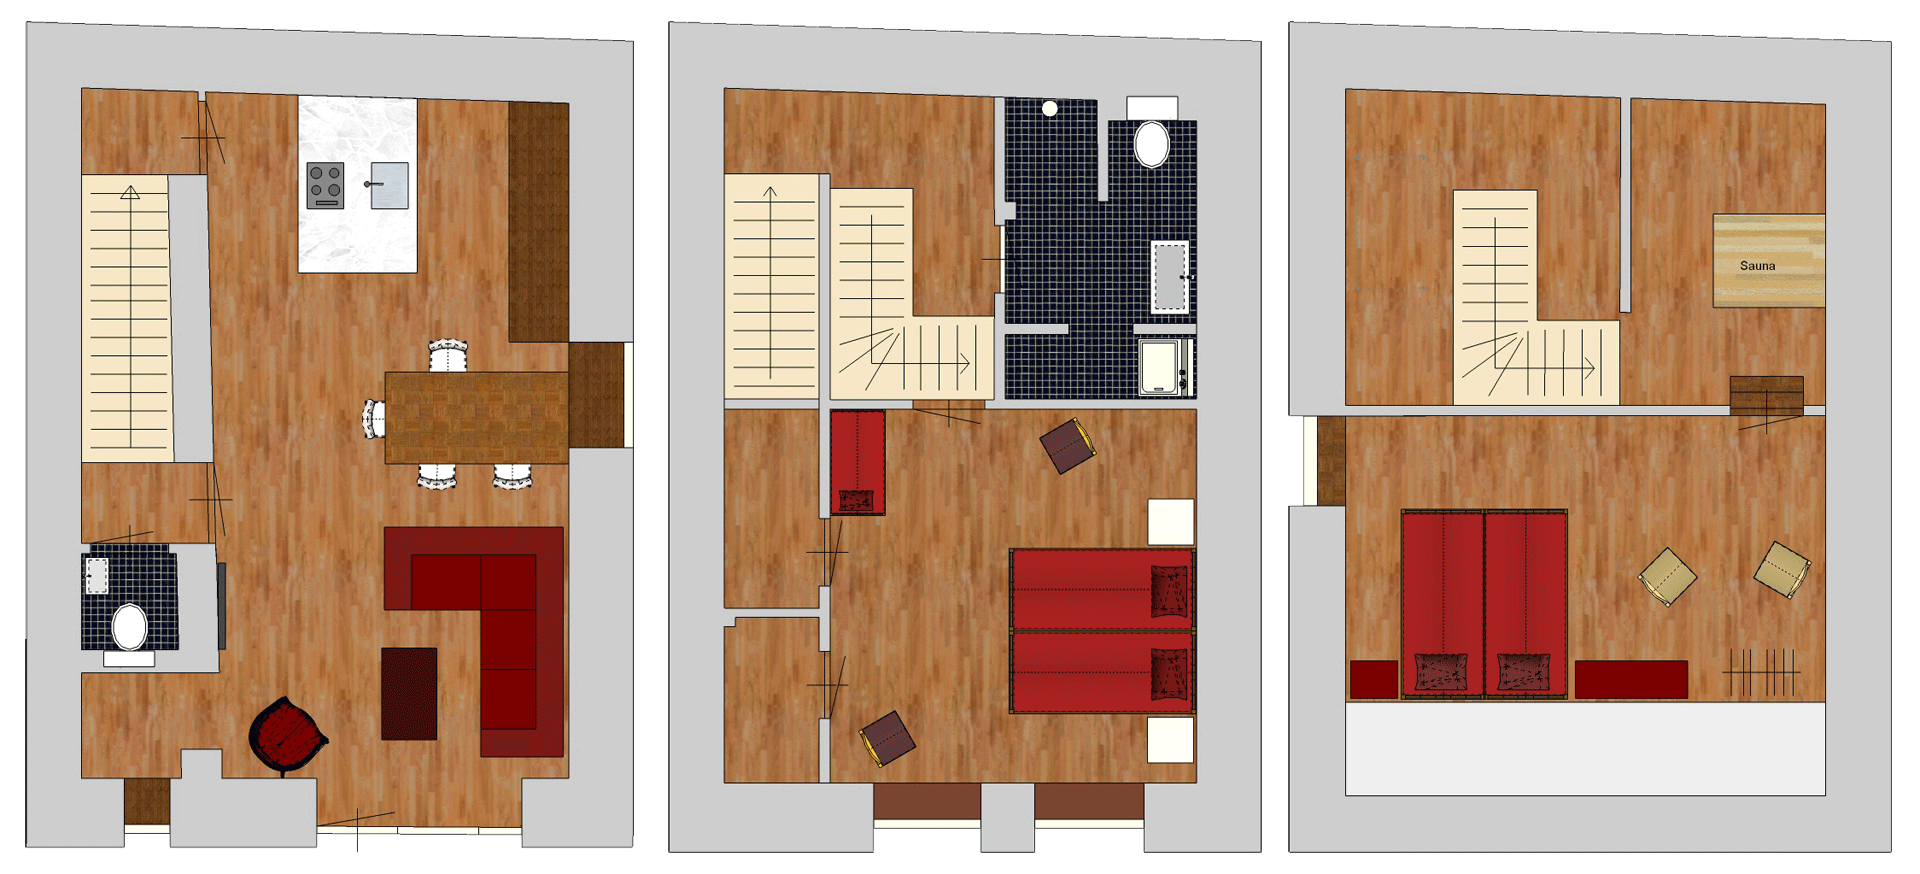 Additional bedrooms and bathrooms